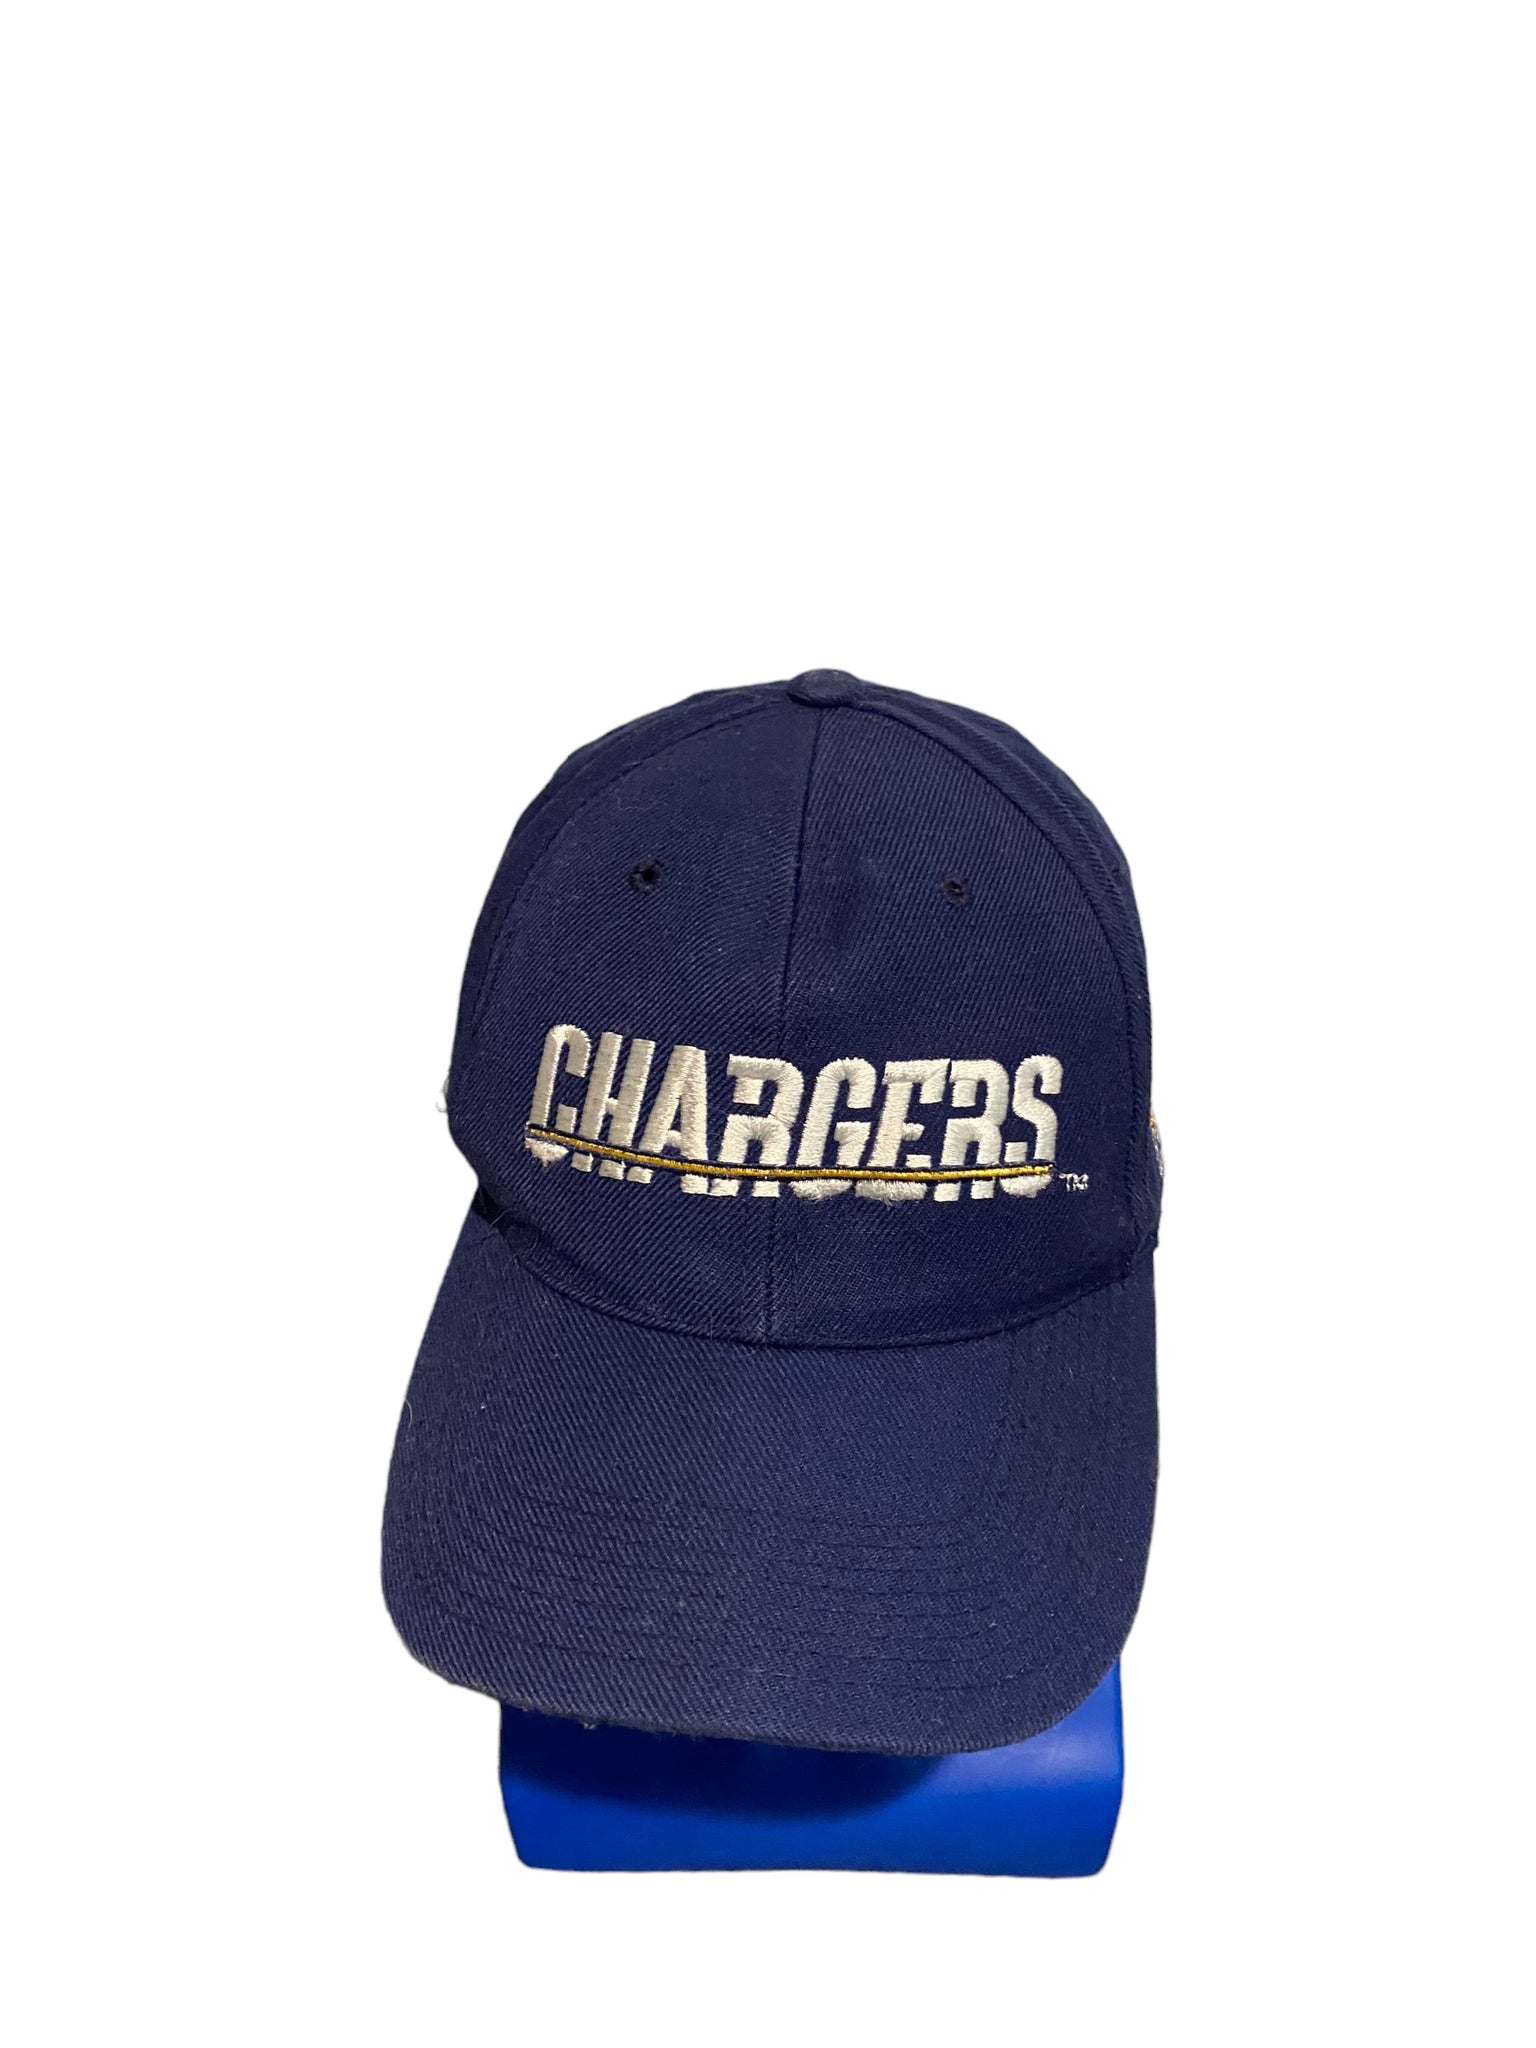 vintage rare nfl sports specialties snapback chargers script hat